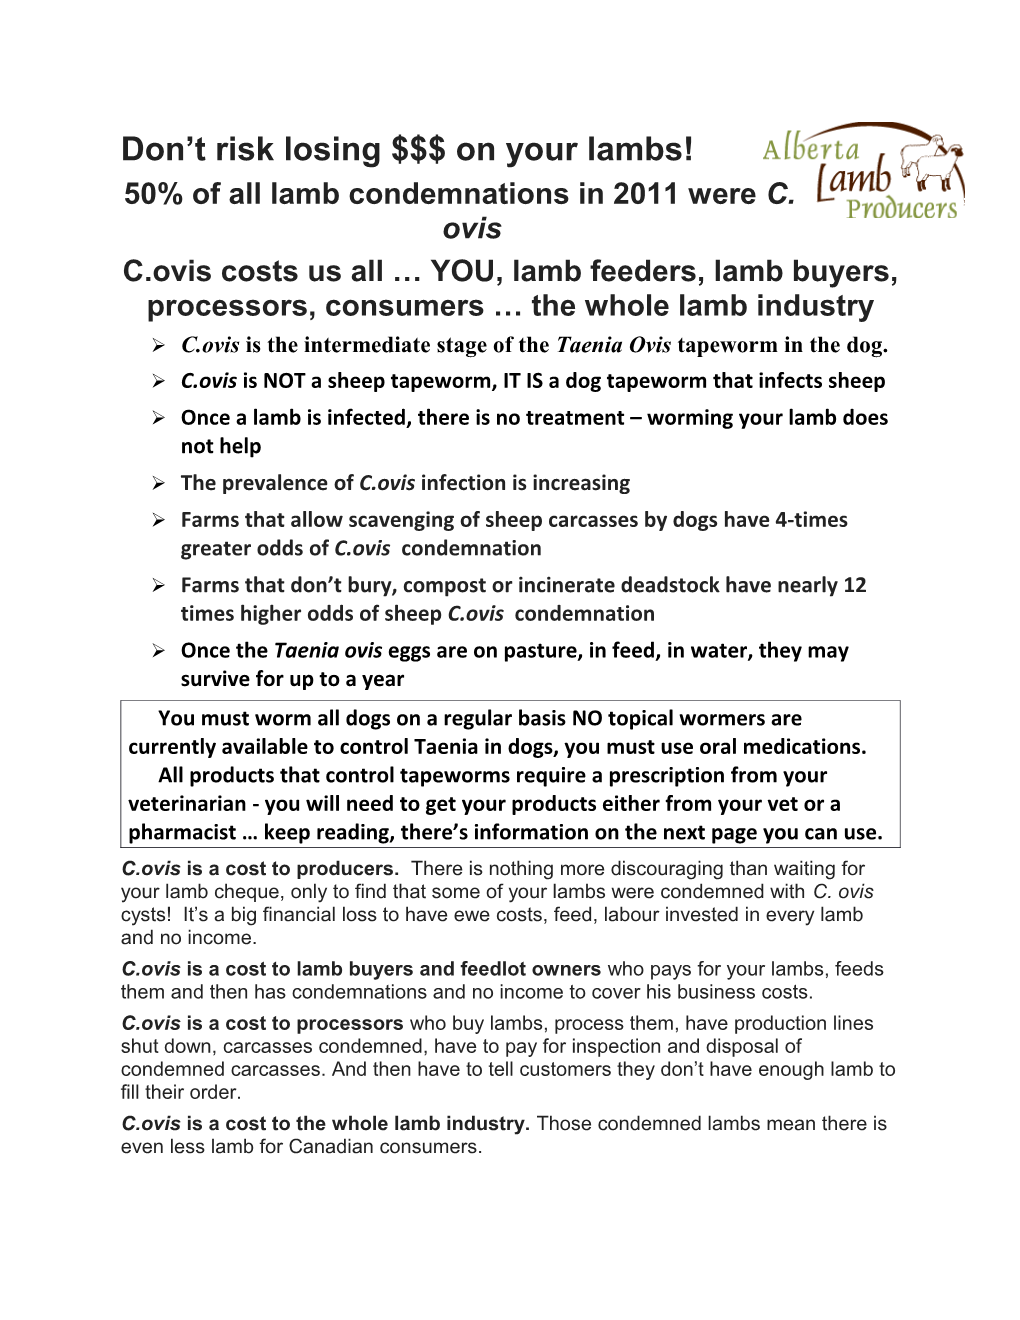 50% of All Lamb Condemnations in 2011 Were C. Ovis